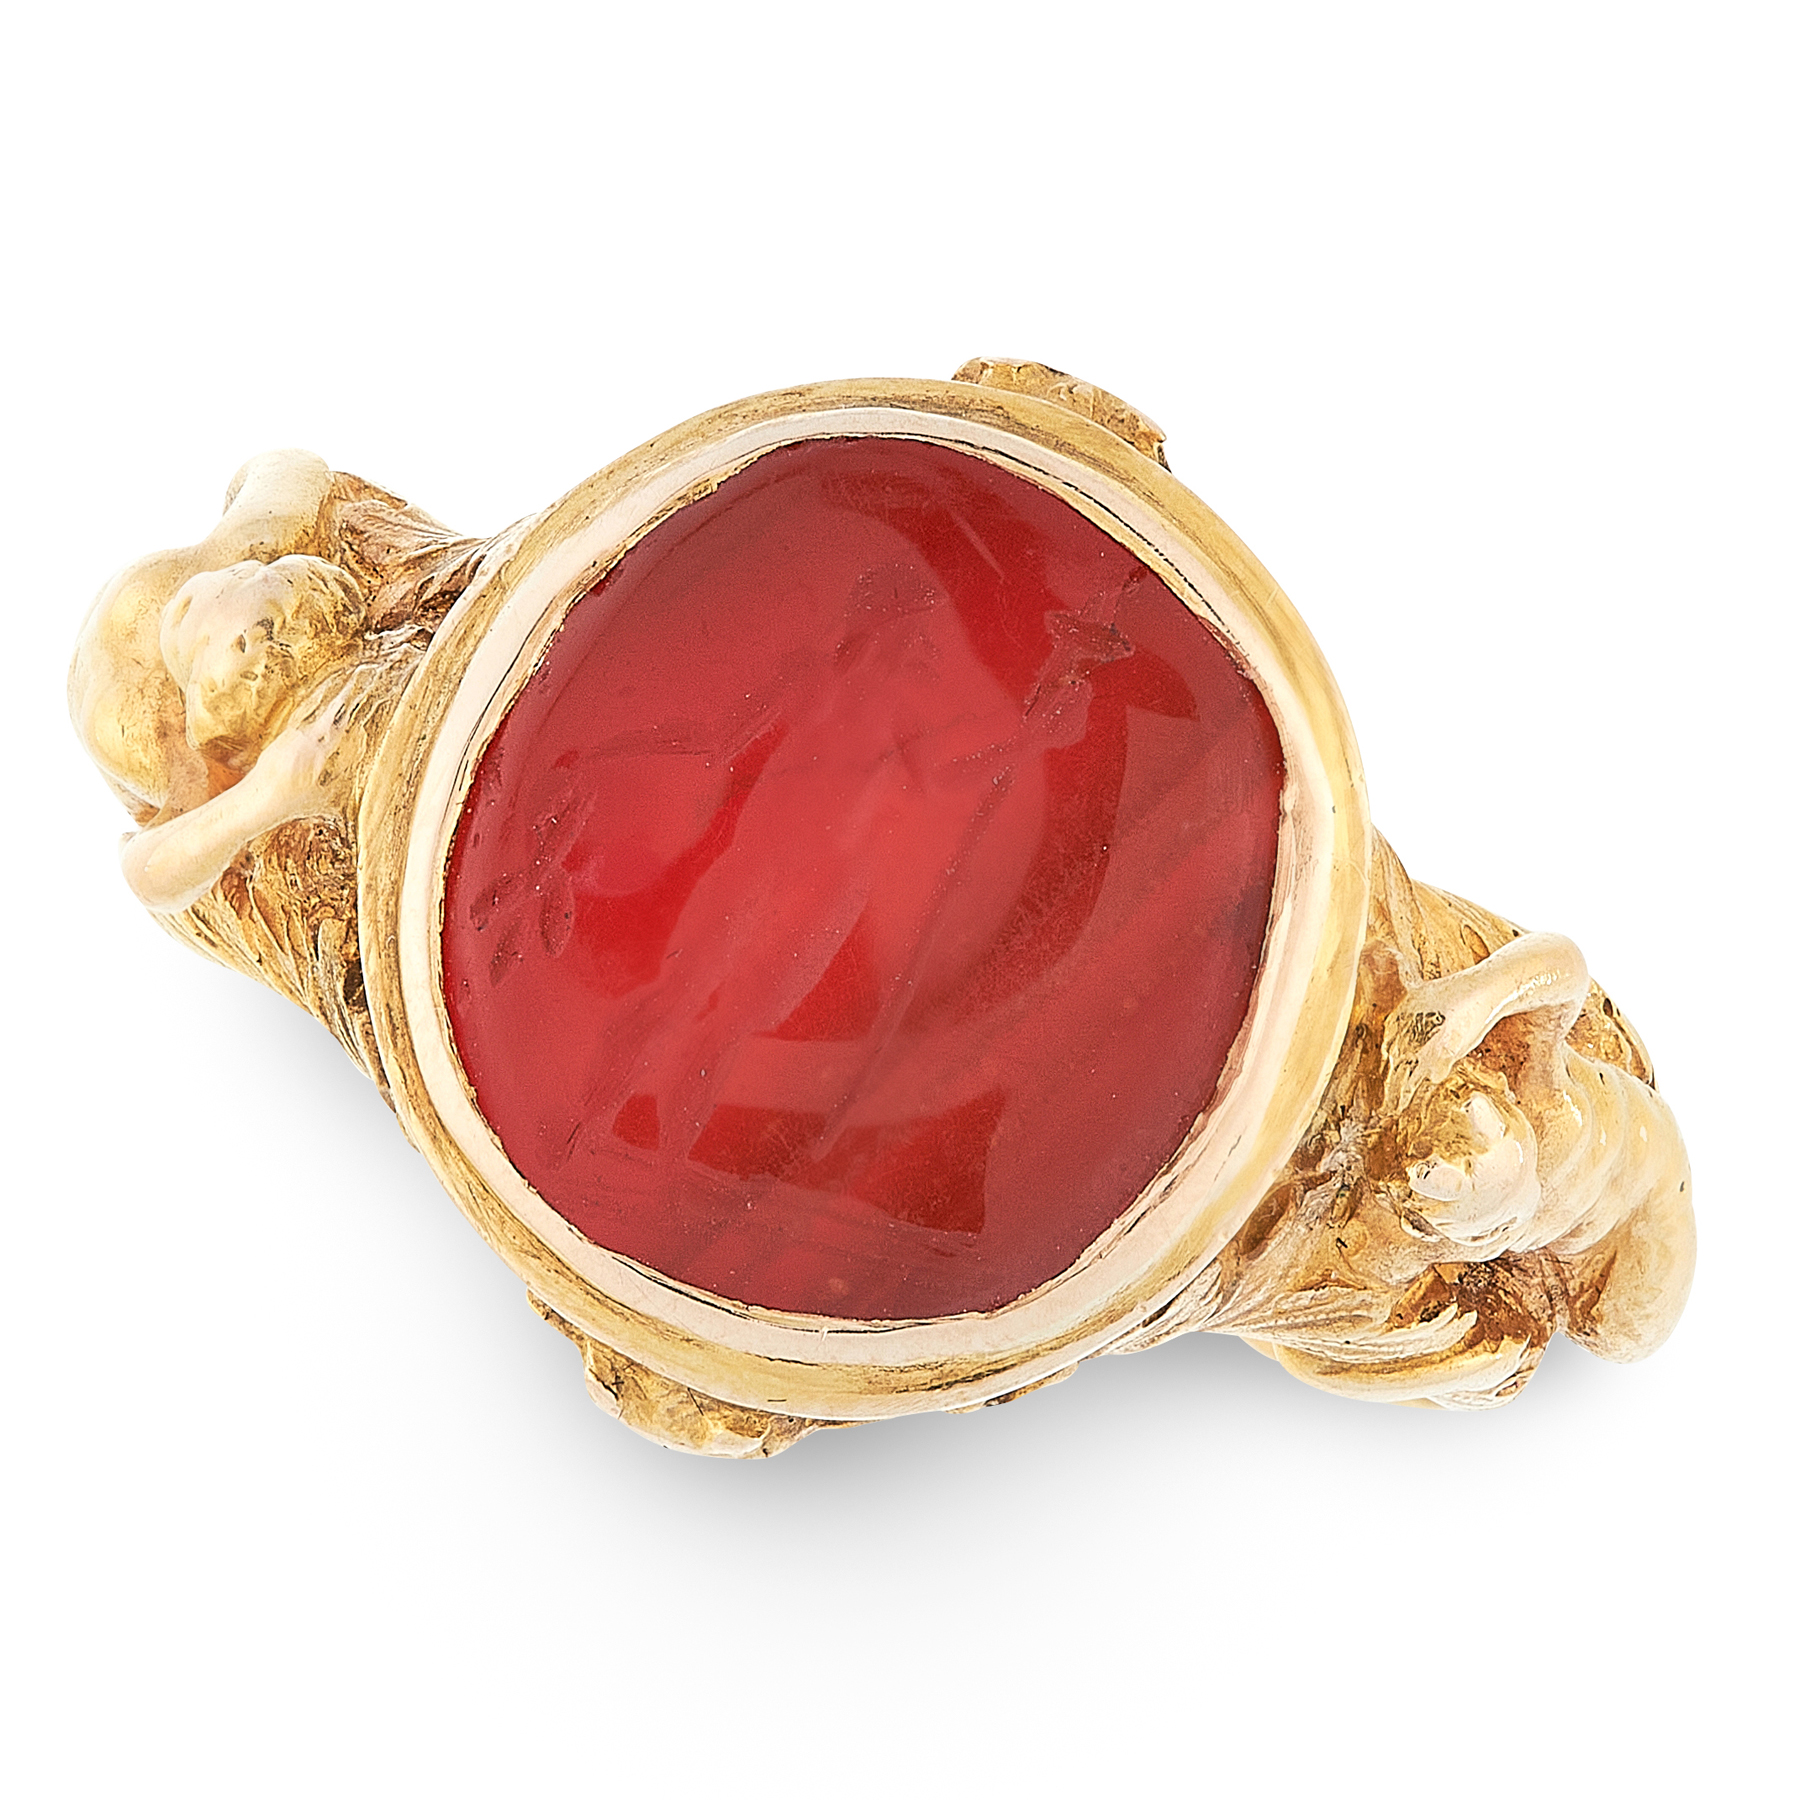 AN ANTIQUE CARNELIAN INTAGLIO SEAL RING, 19TH CENTURY in 18ct yellow gold, the oval carnelian